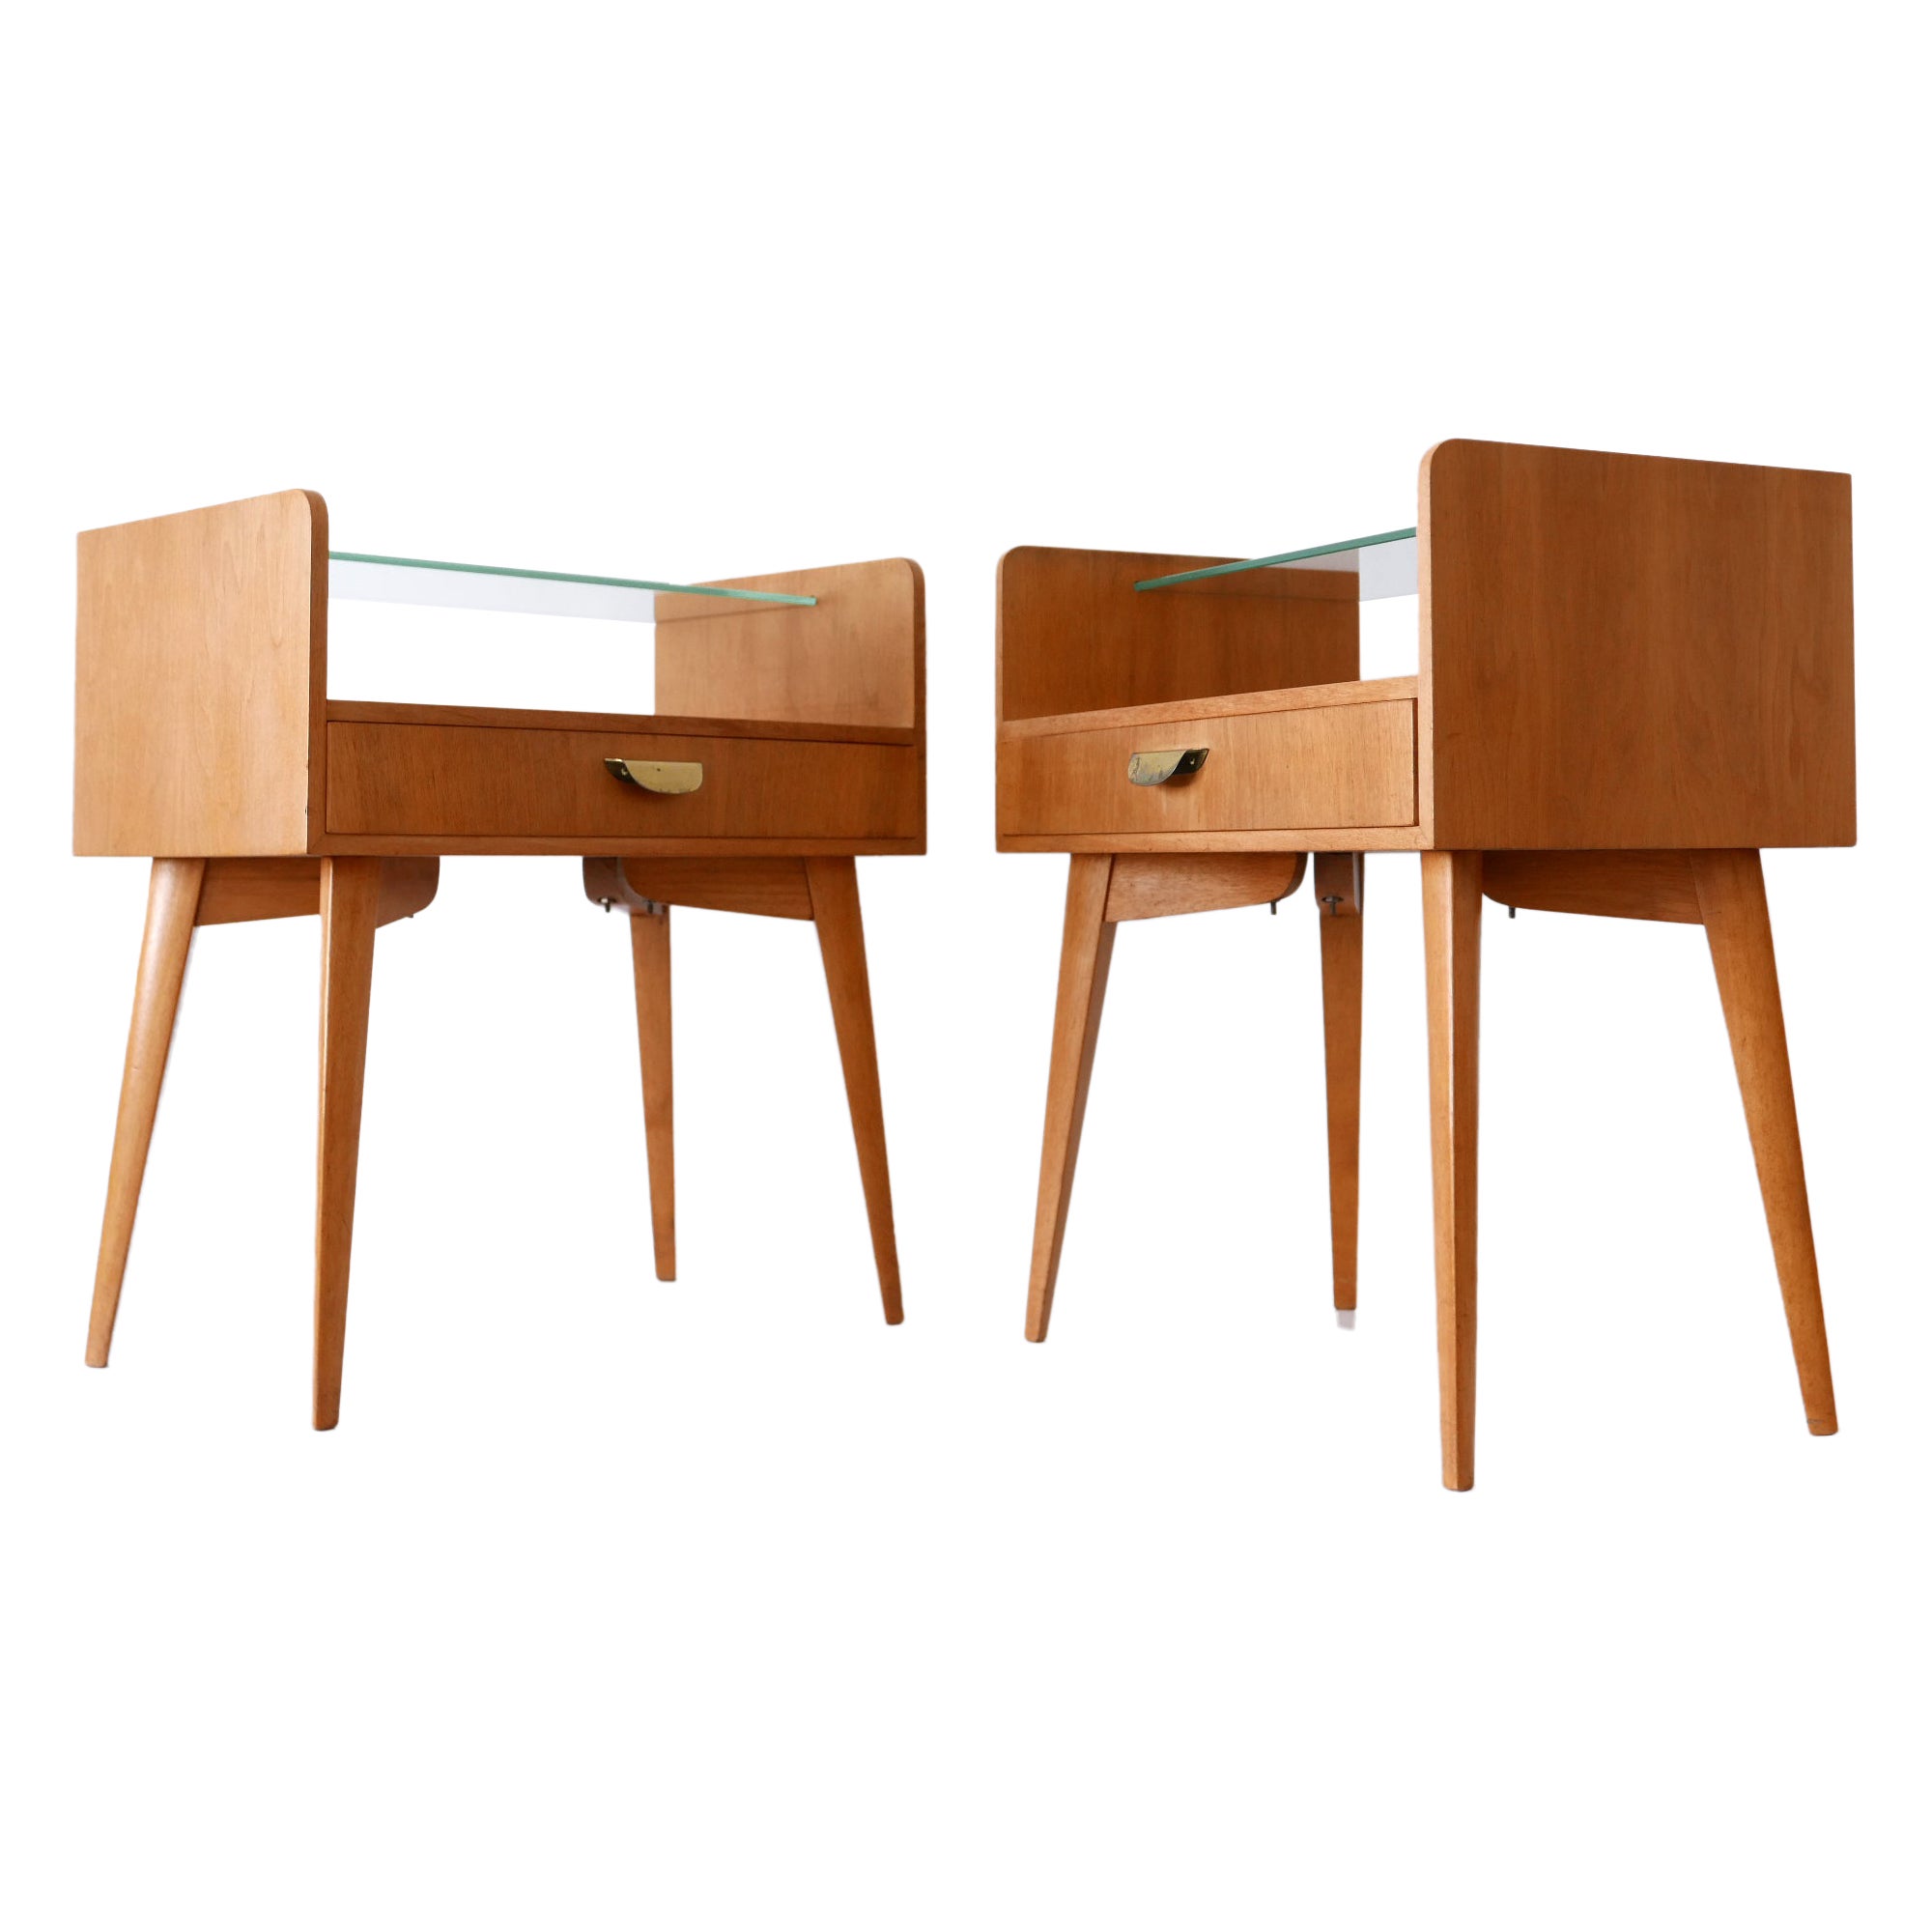 Set of Two Mid Century Modern Walnut Nightstands by WK Möbel Germany 1950s For Sale